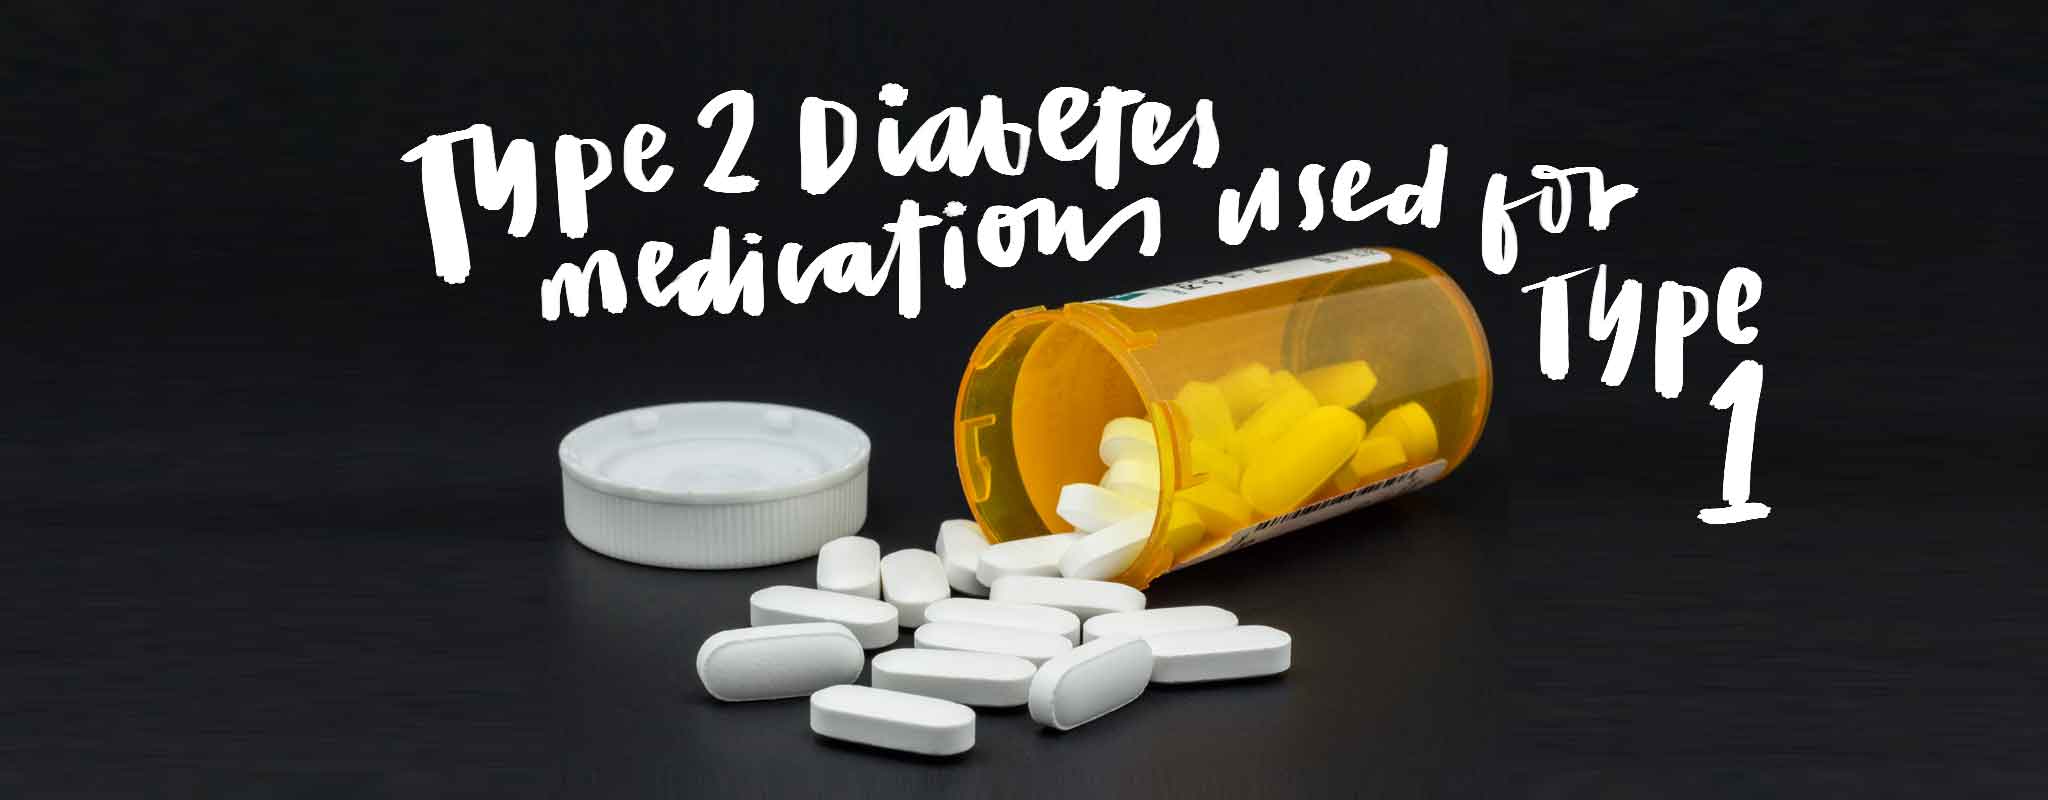 What Medication Is Used For Type 2 Diabetes